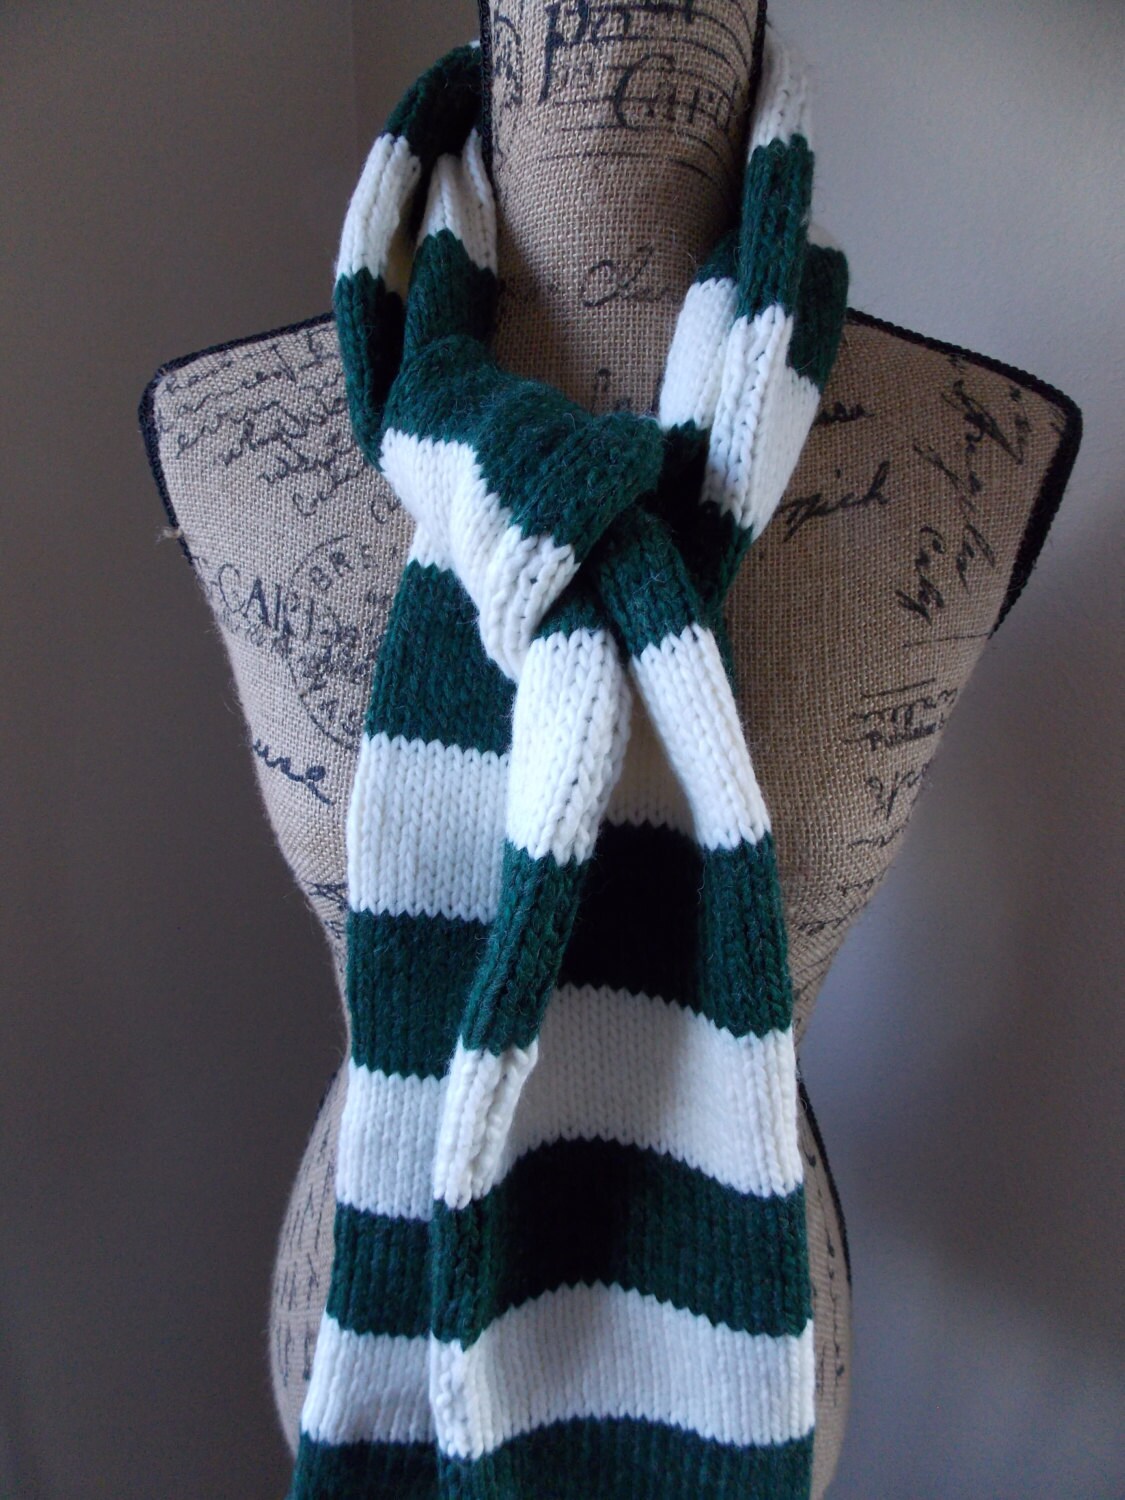 Green and White Stripe Scarf school colors scarf by cheshirecatmad